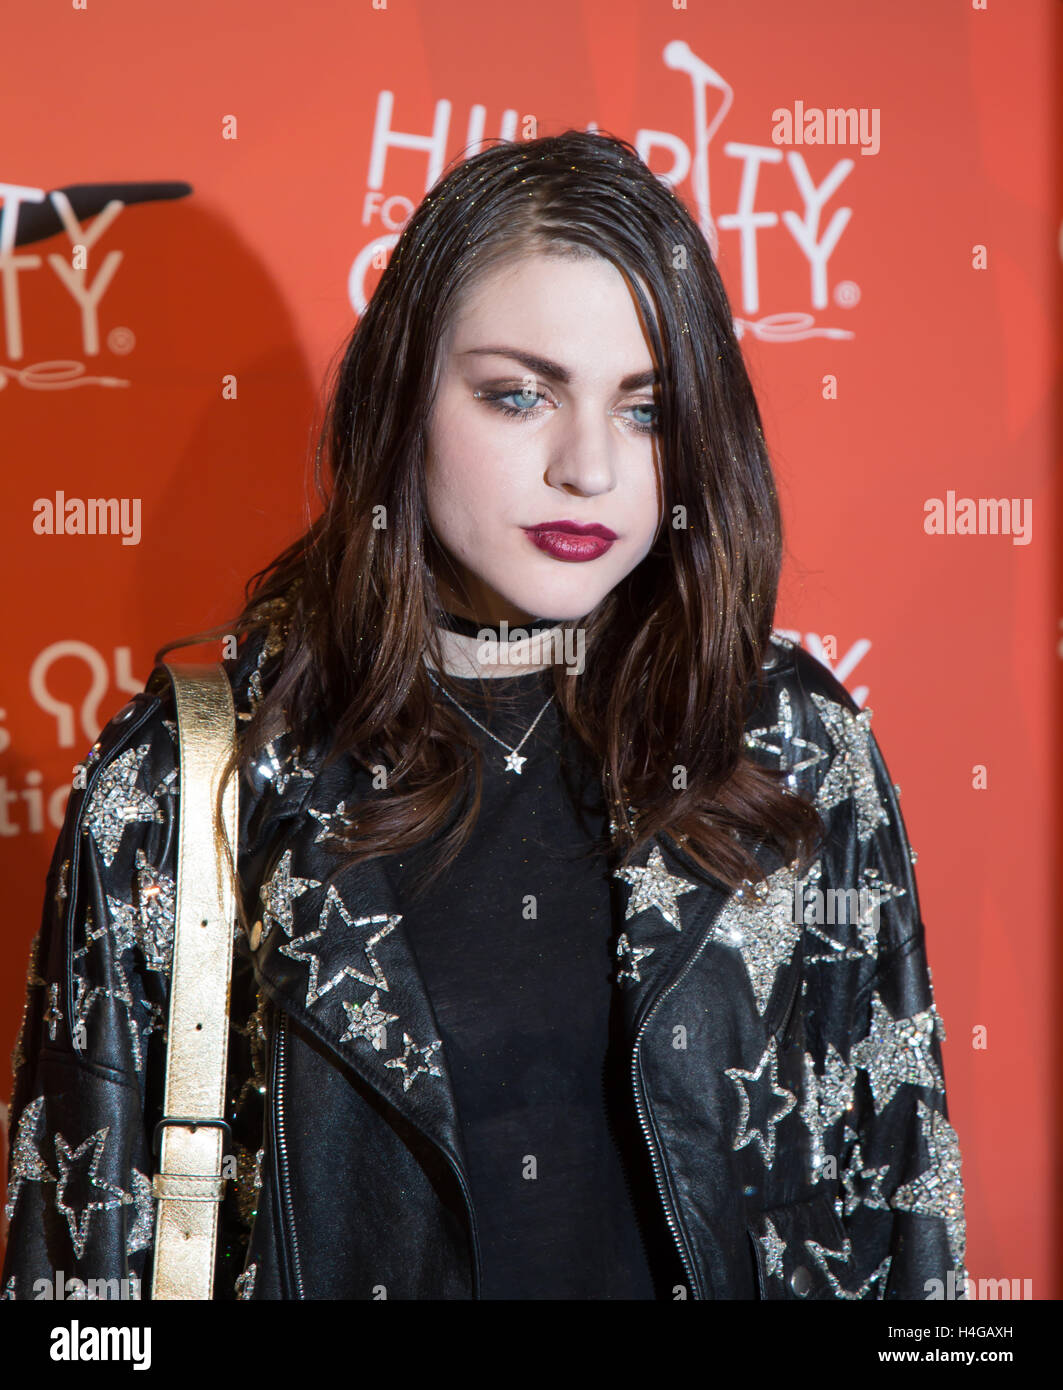 Los Angeles, USA. 15th Oct, 2016. Frances Bean Cobain attends Hilarity for Charity's 5th Annual Los Angeles Variety Show: Seth Rogen's Halloween at Hollywood Palladium on October 15, 2016 in Los Angeles, California. Credit:  The Photo Access/Alamy Live Ne Stock Photo